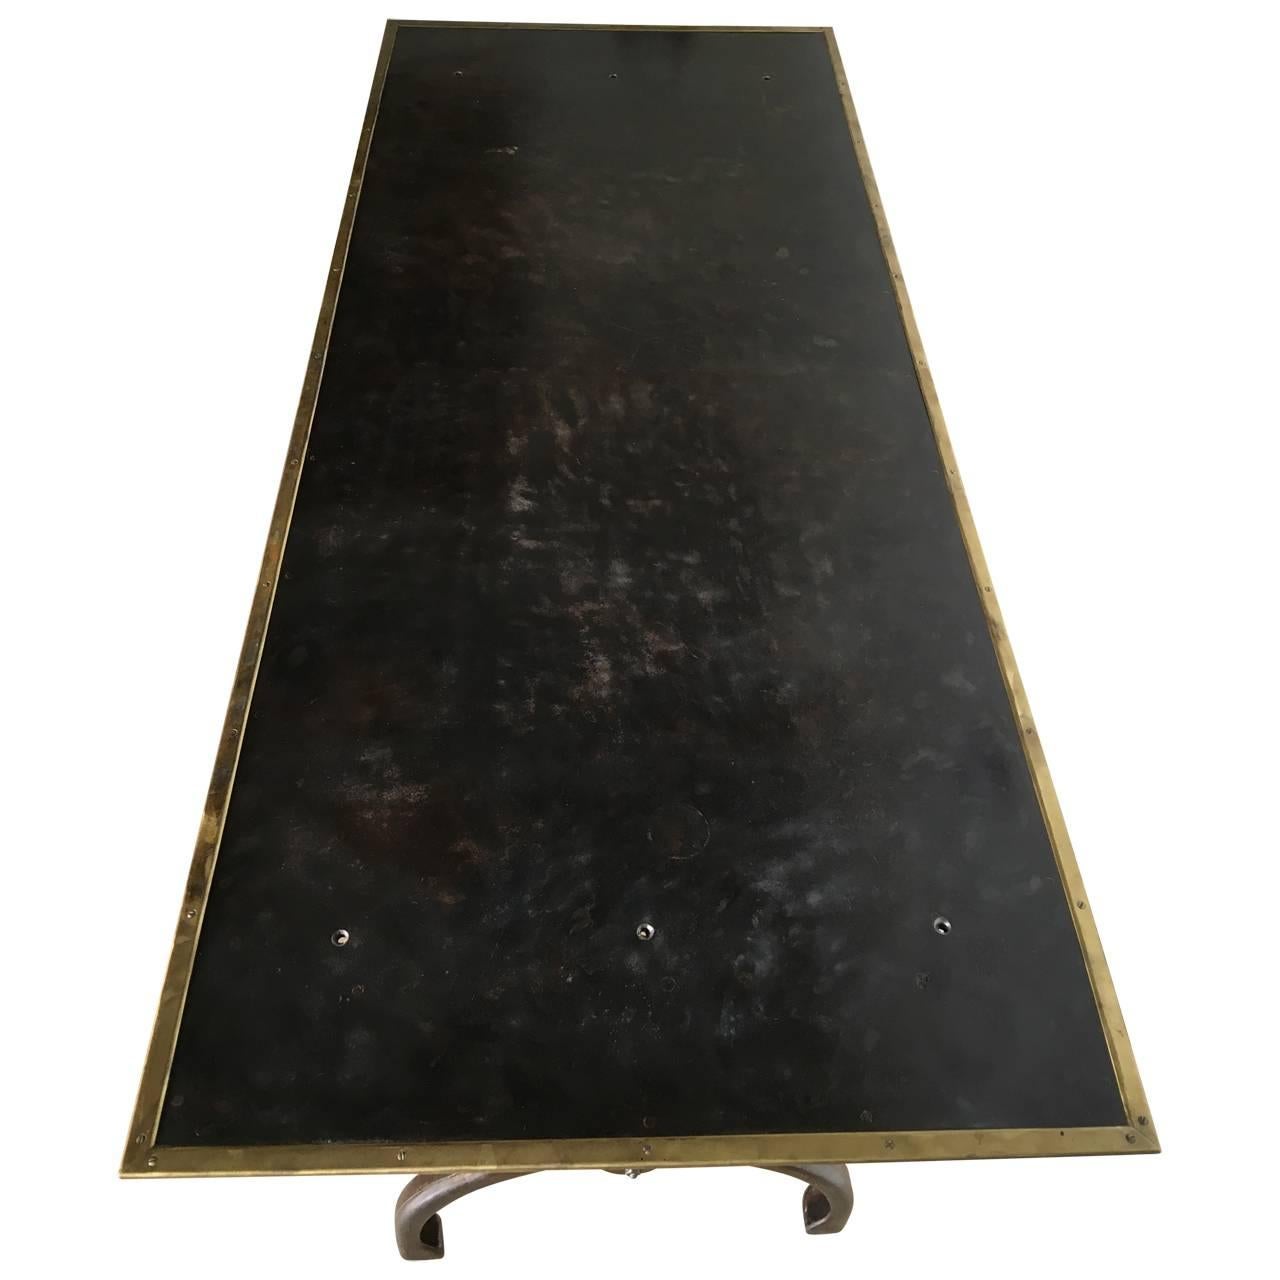 Amazing cartographers table, with provenance of The Original National Geographic Society, headquartered in Washington, D.C. Solid and stabile steel base and brass frame with unbeatable patina.